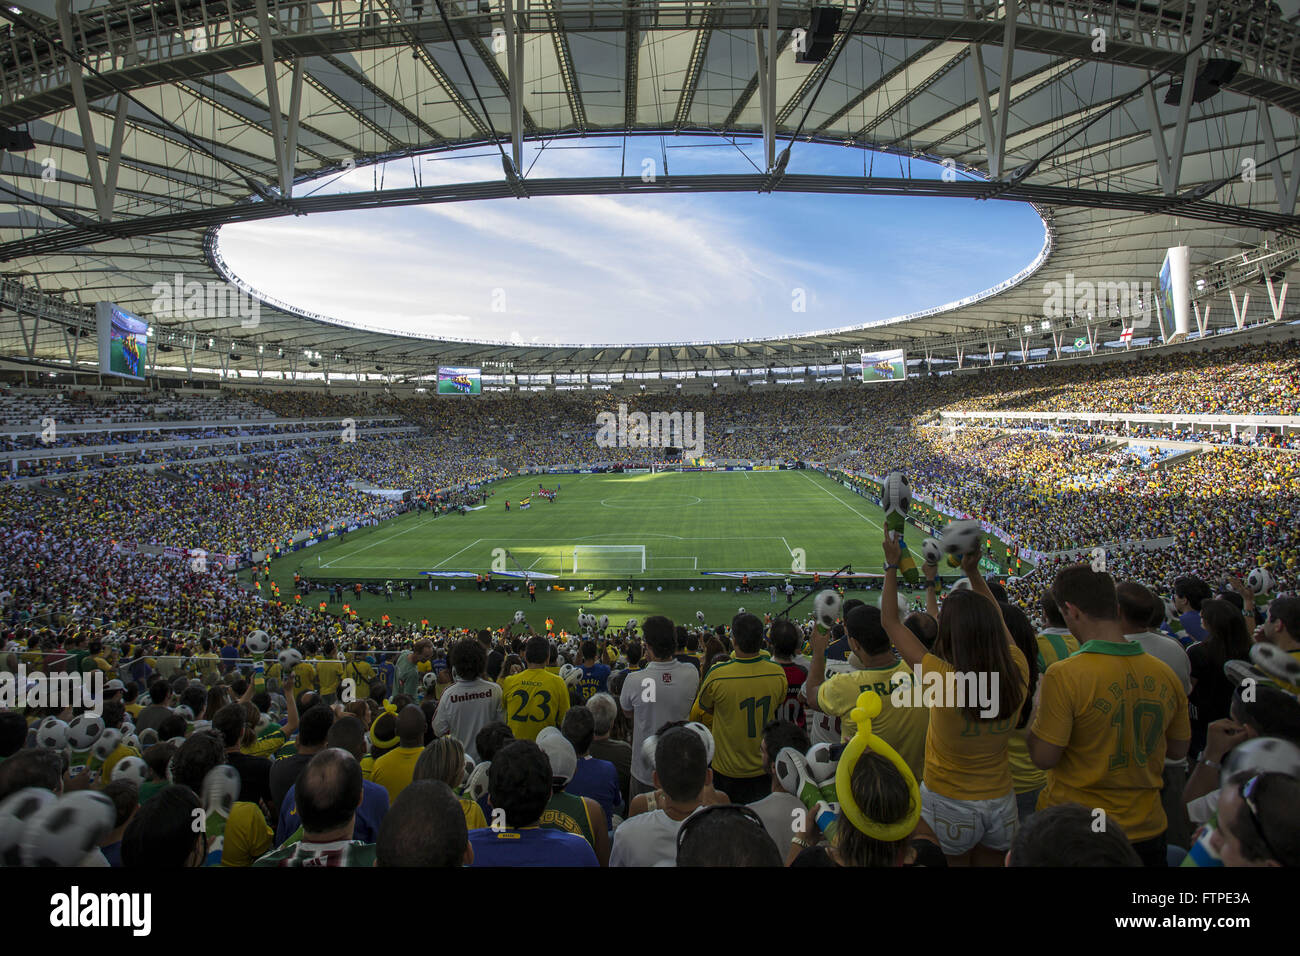 Reopening the Estadio do Maracana with friendly match between the national teams of Brazil and England Stock Photo